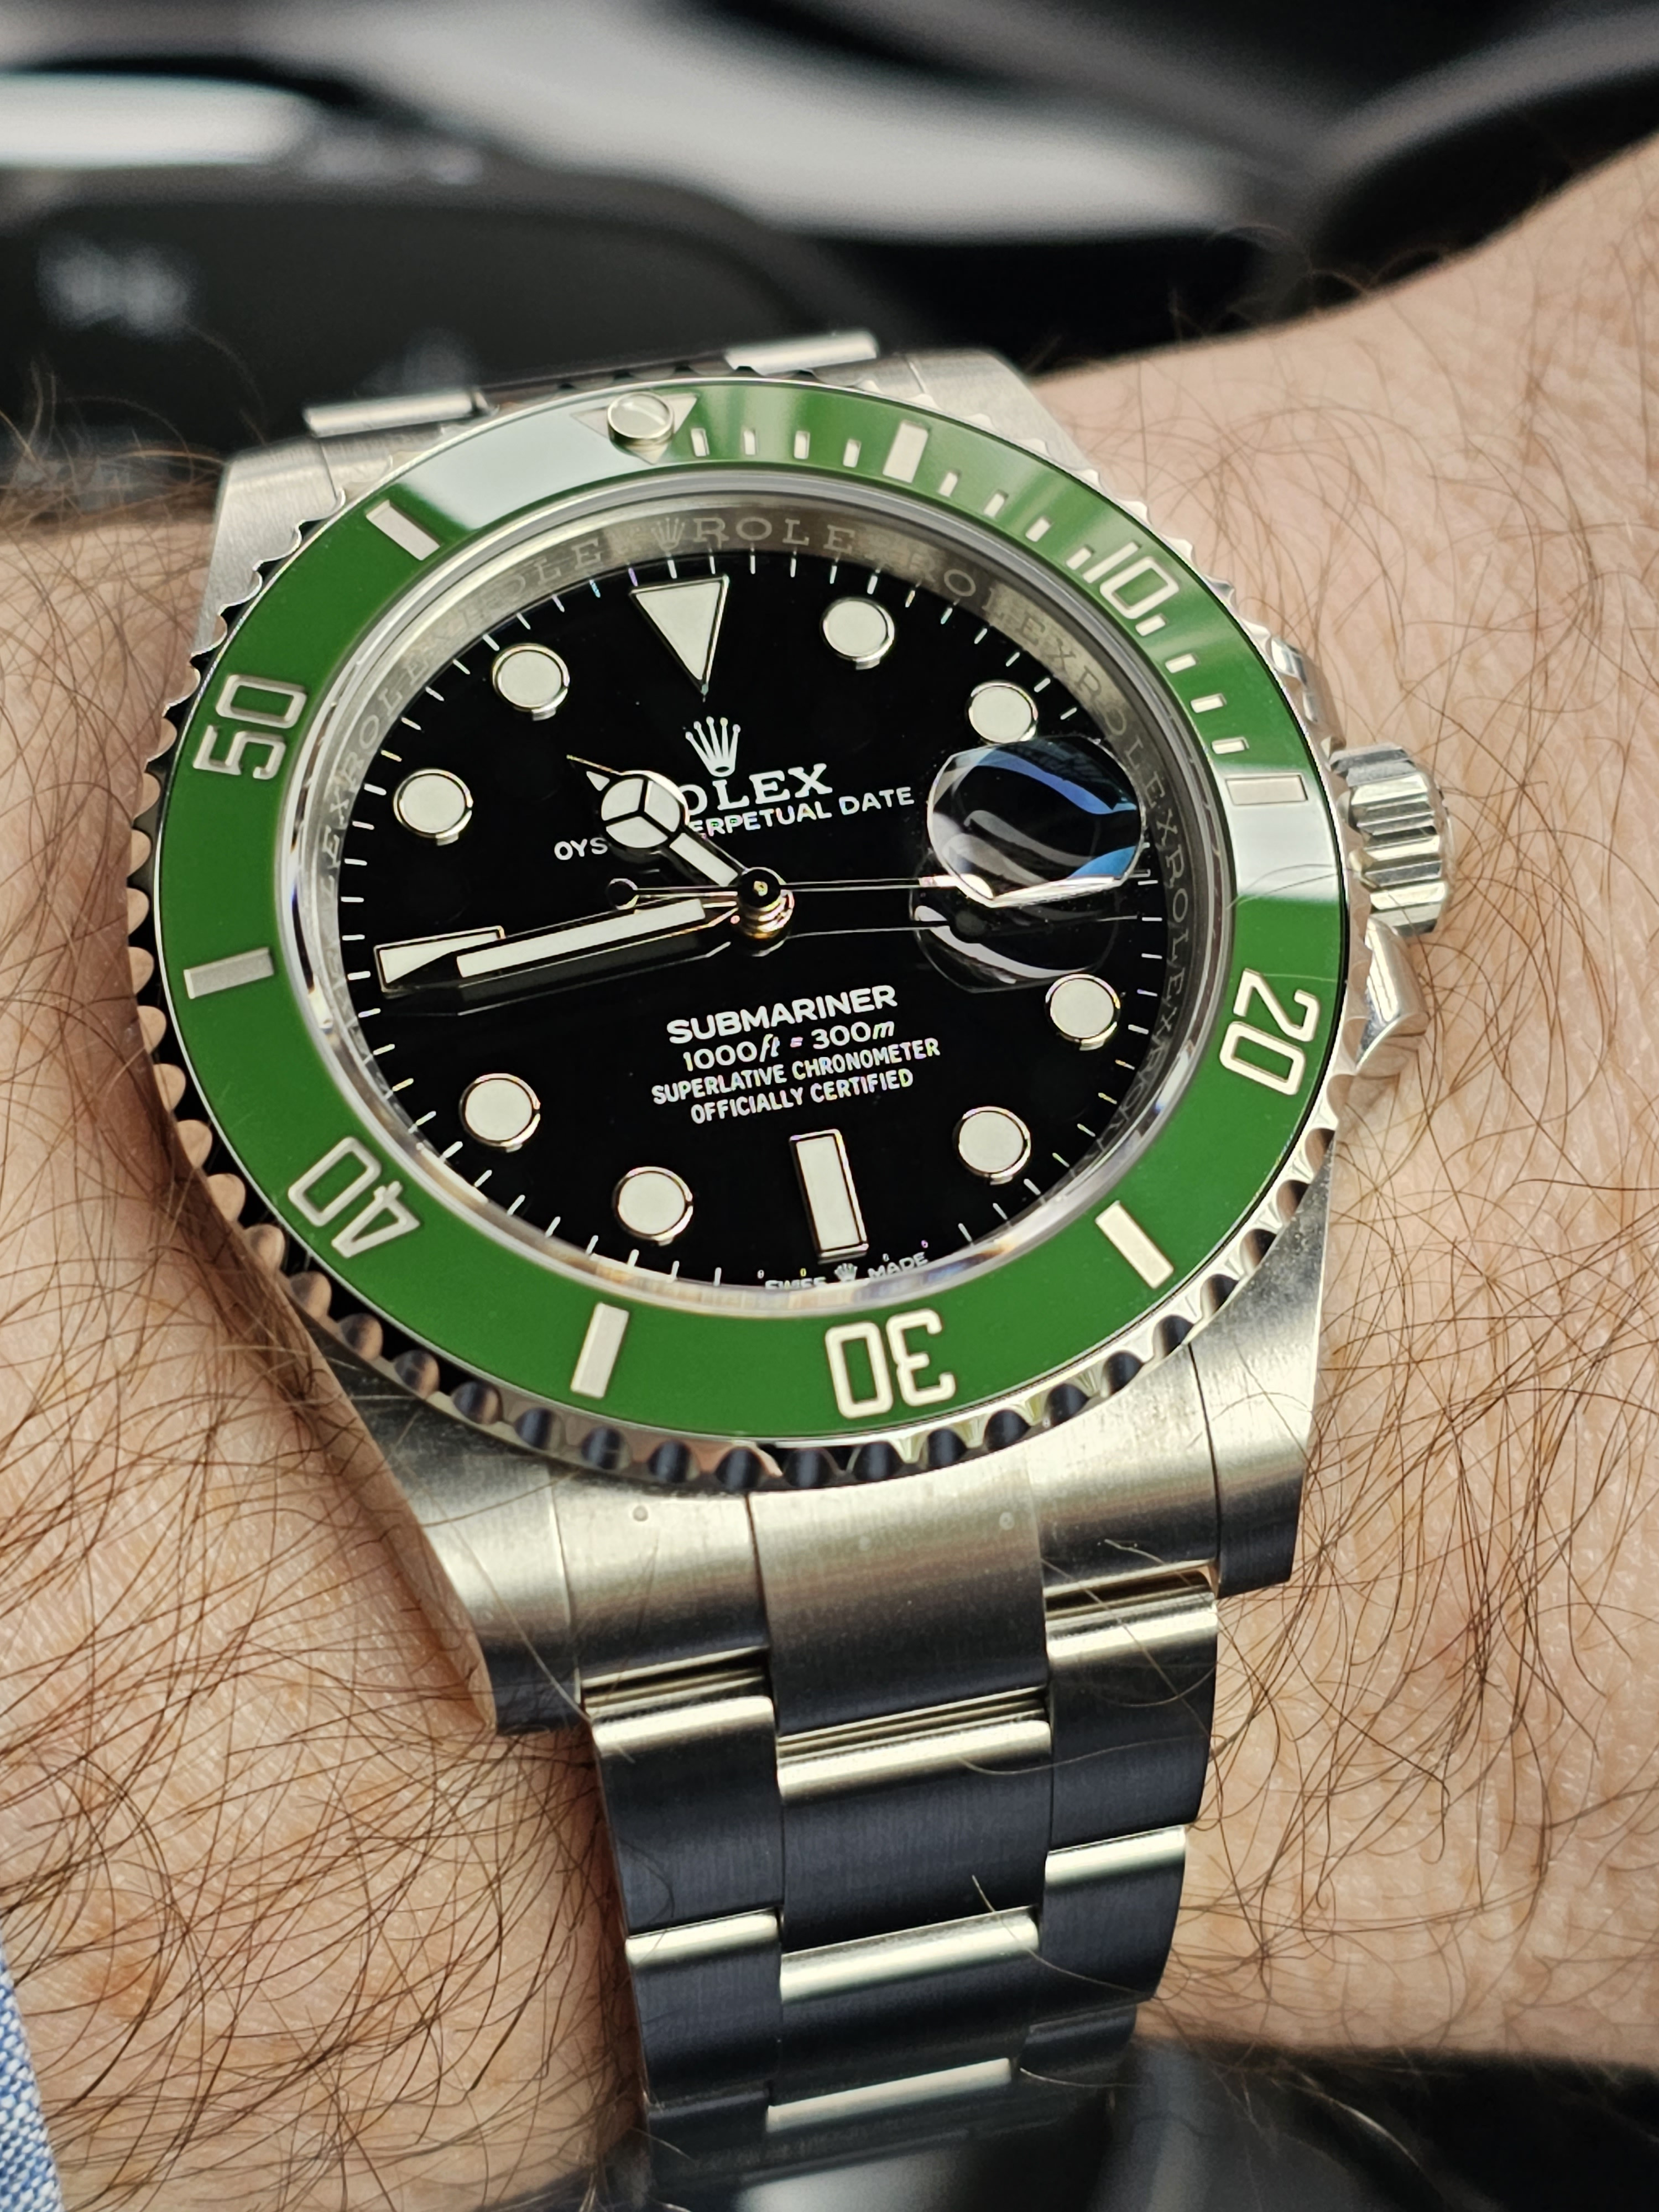 New & Old LV side by side - Rolex Forums - Rolex Watch Forum